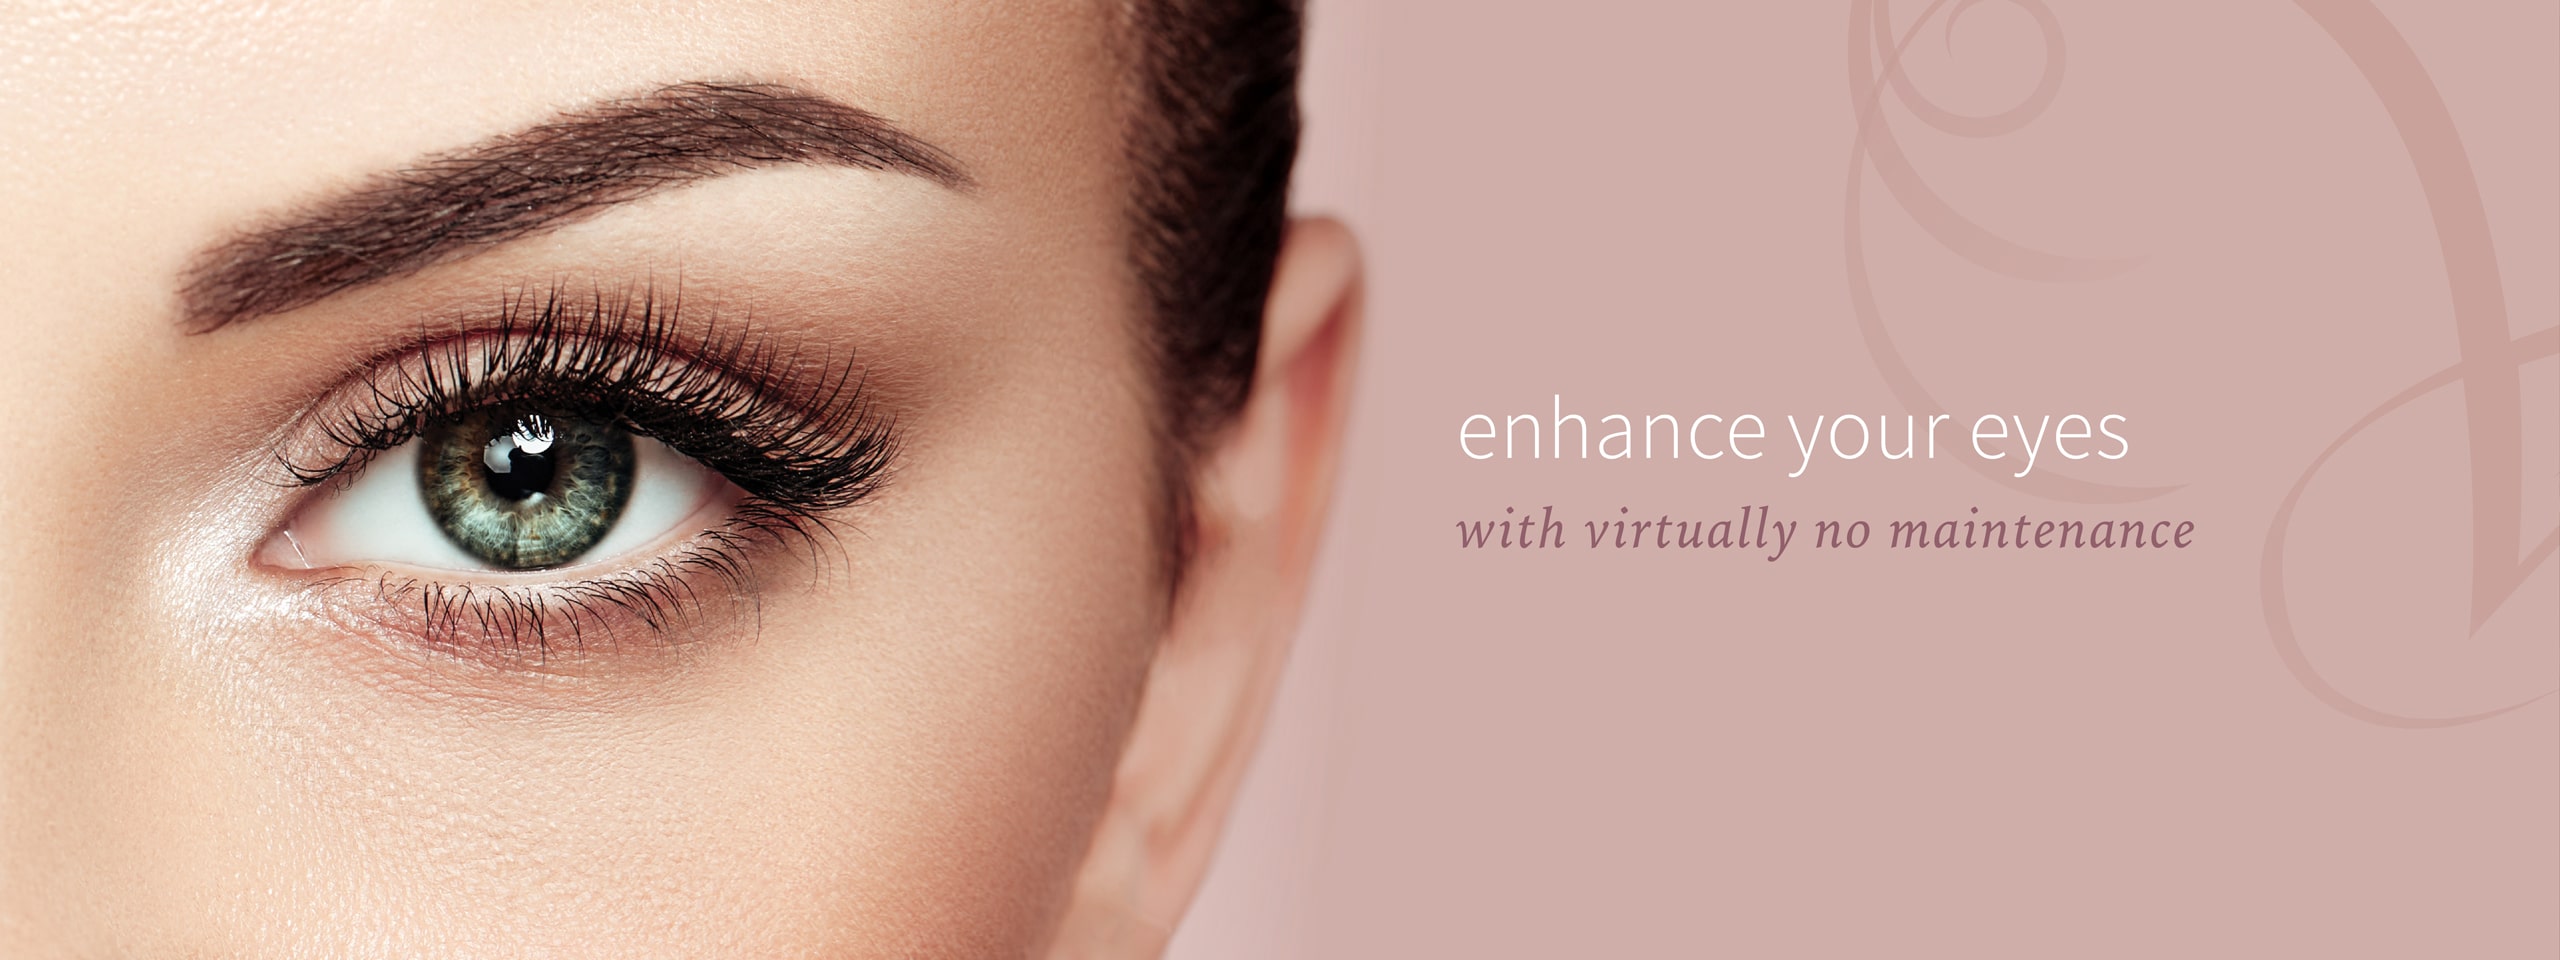 Vitality Antiaging Center Lashes Treatments